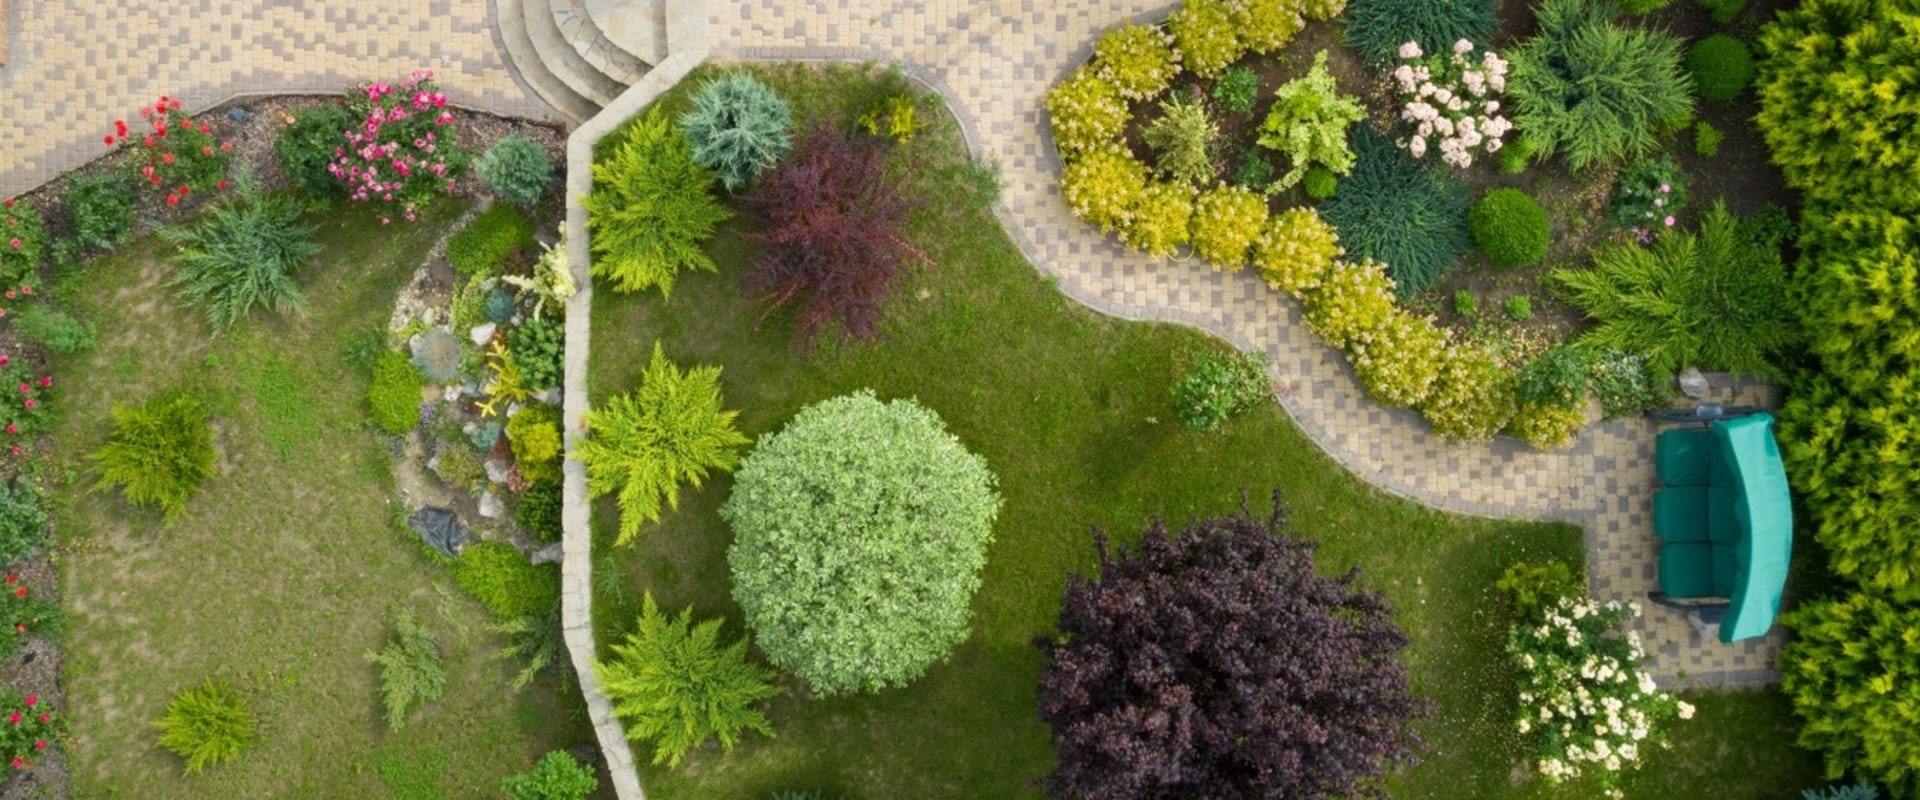 Whats the difference between a landscape designer and architect?